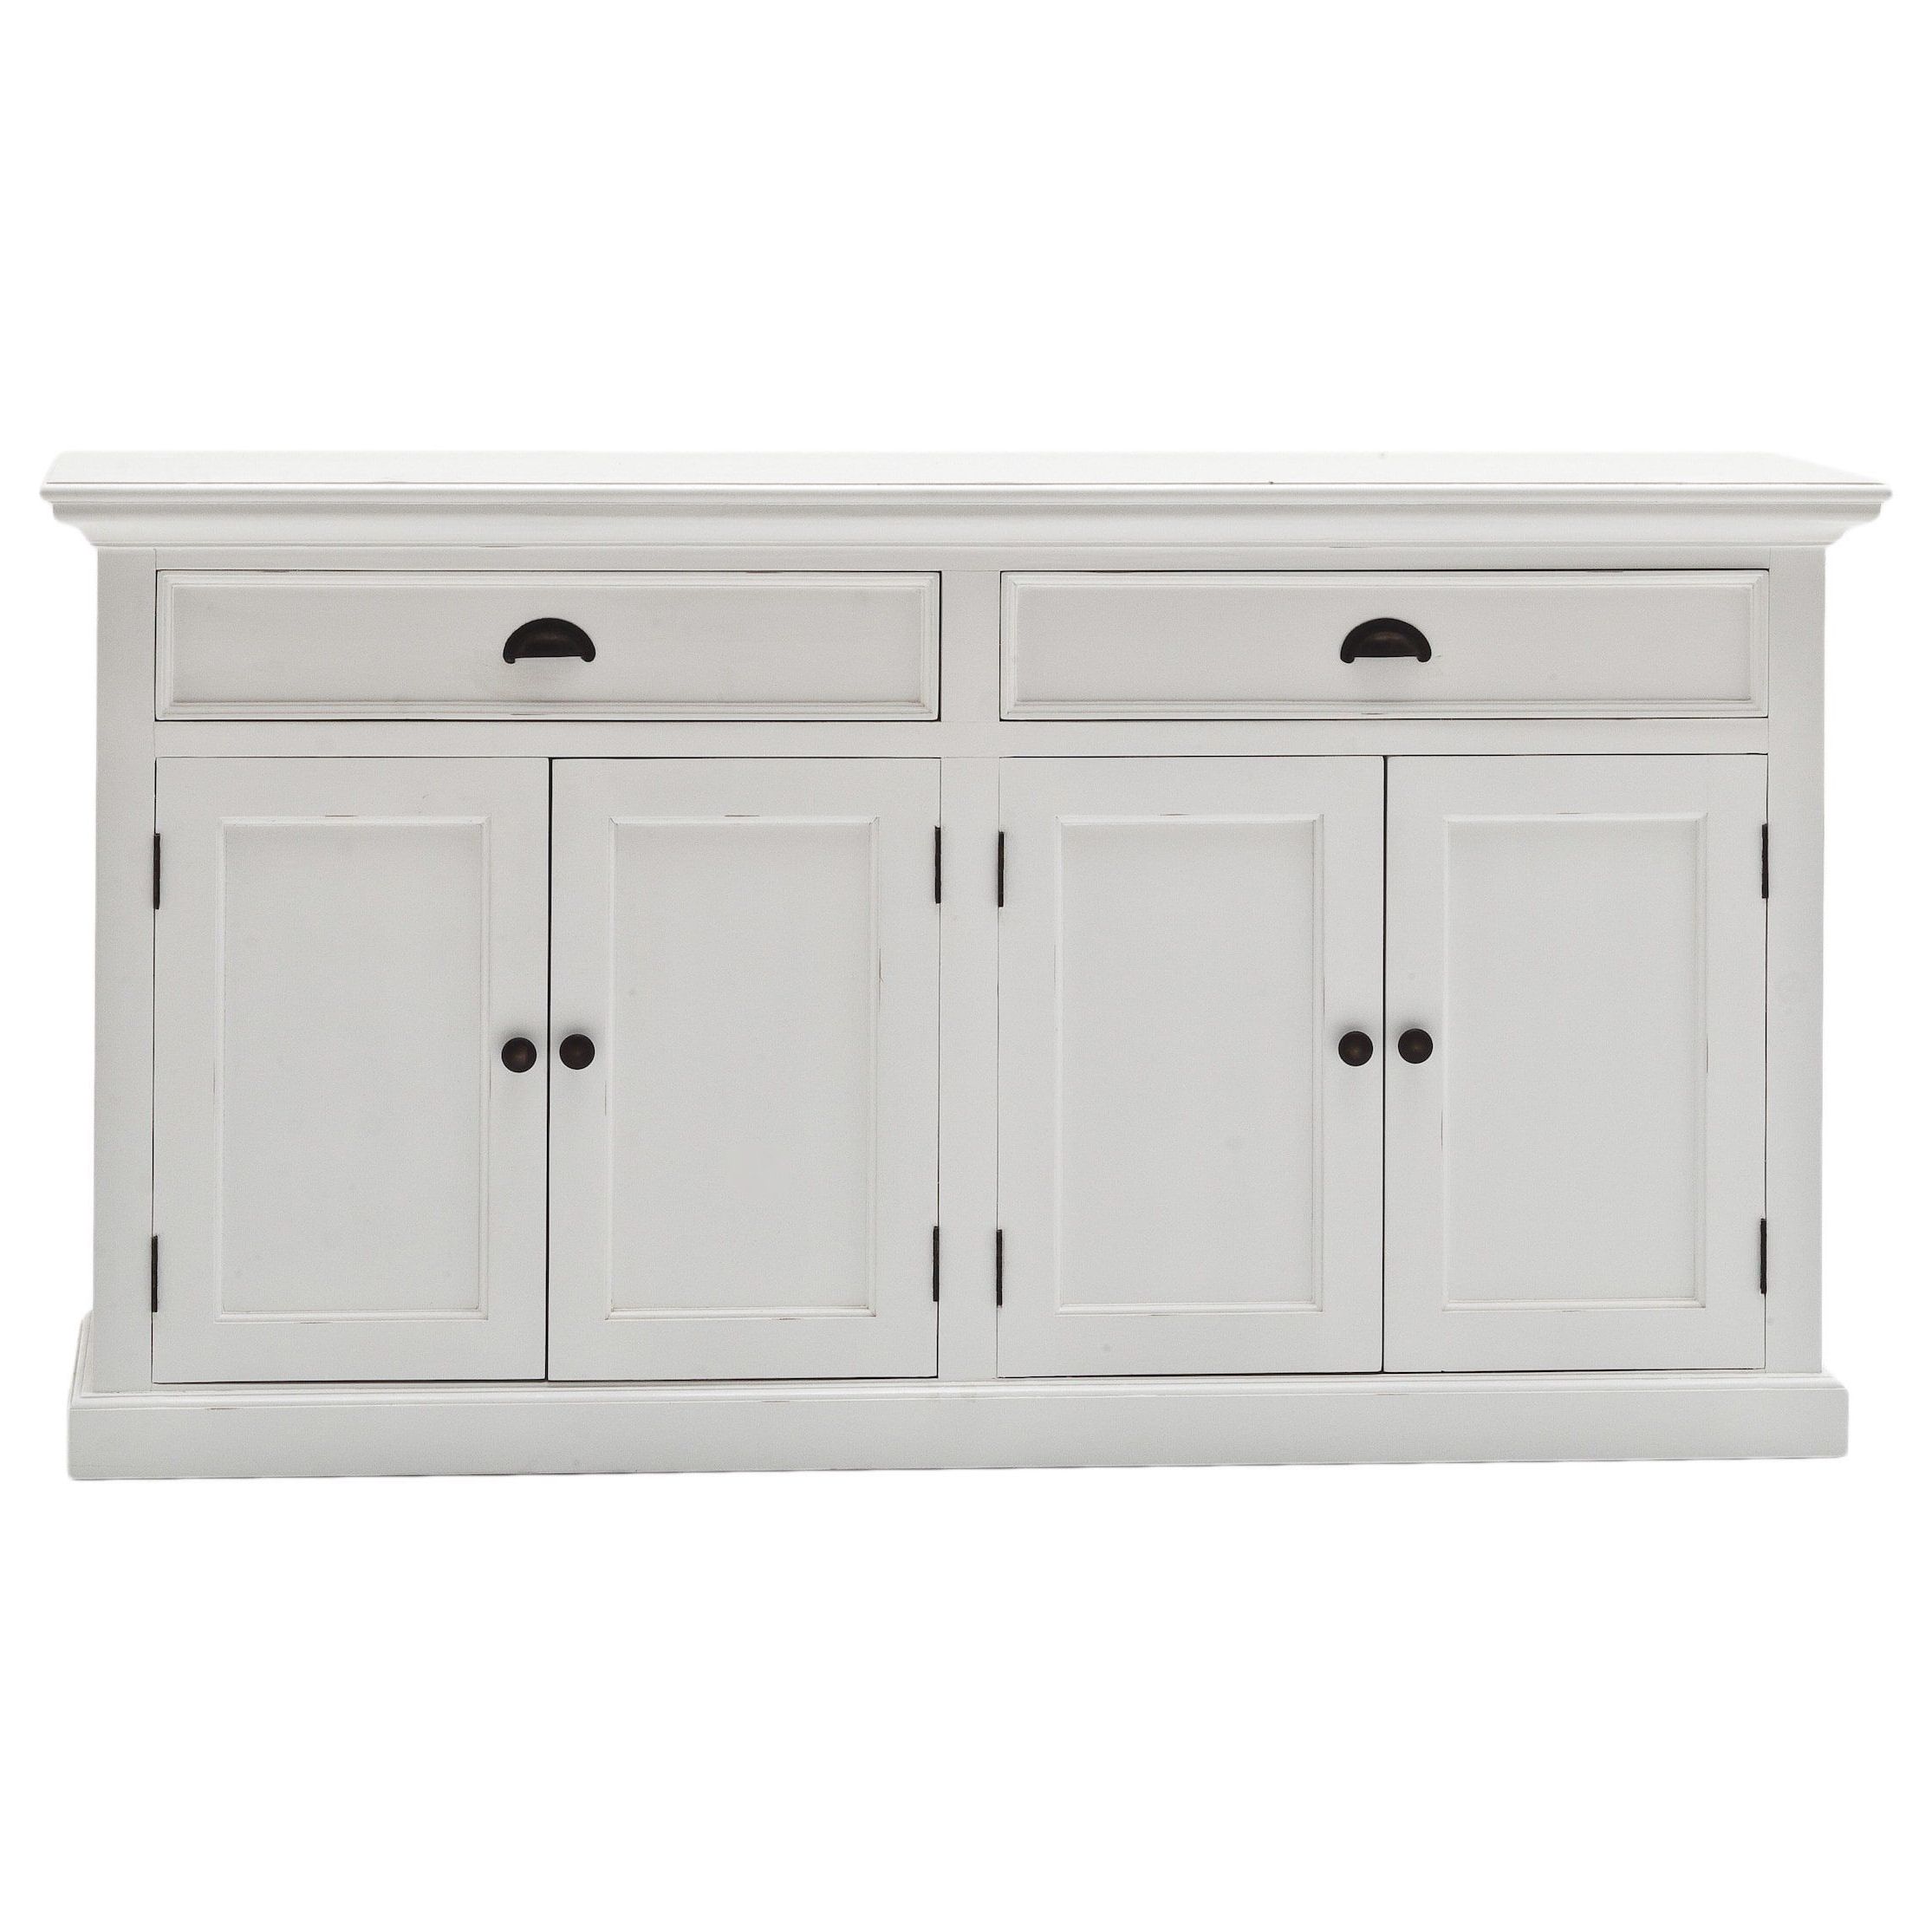 2020 Amityville Wood Sideboards Intended For The Gray Barn Lands Deerpark White Mahogany Wood Classic (View 11 of 20)